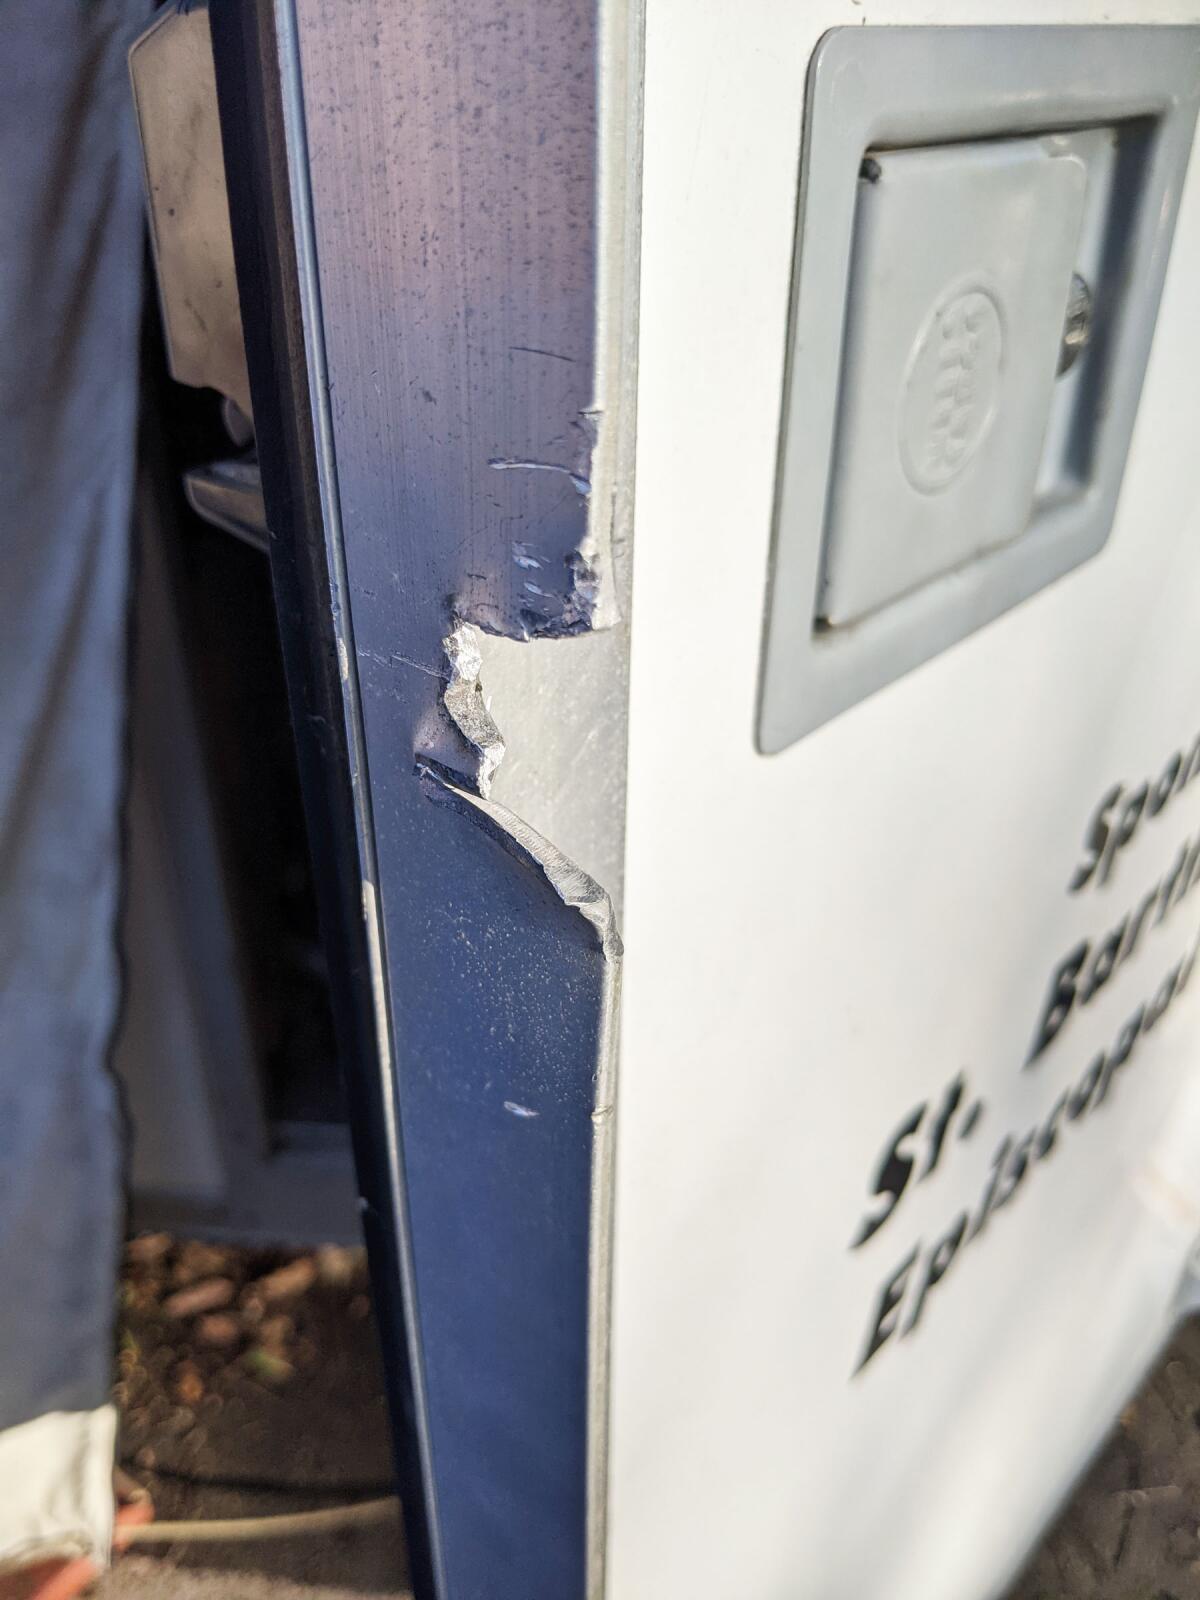 Scoutmaster Craig Dickson said the trailer's side door hasp was cut to remove the lock.